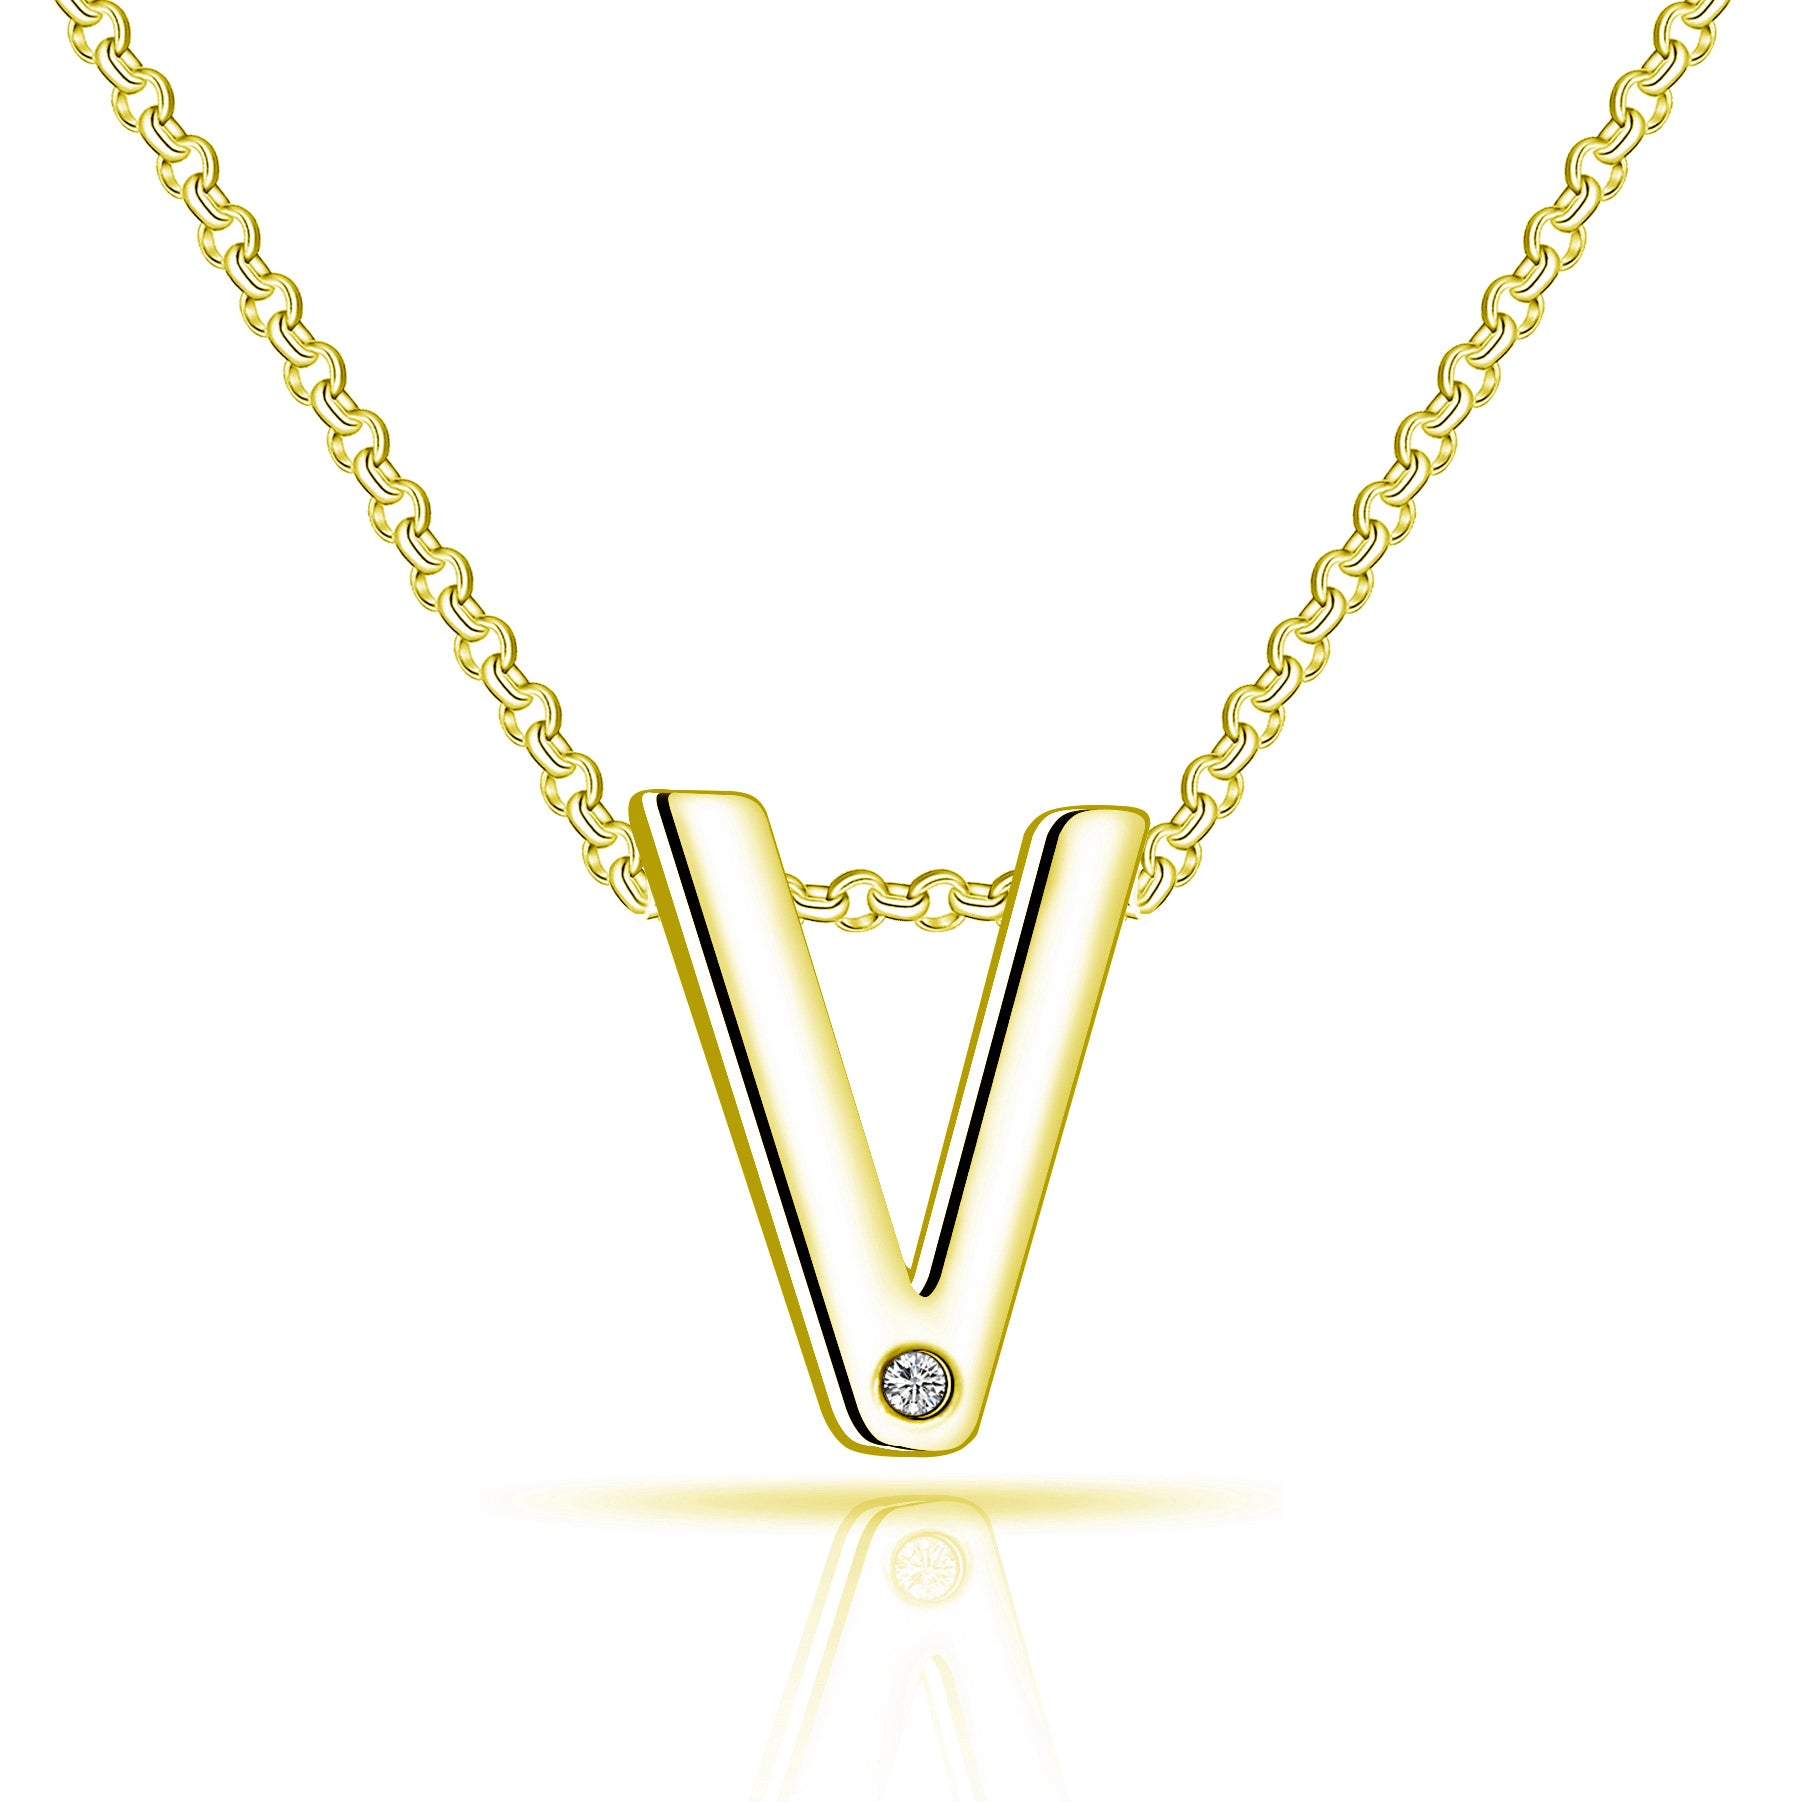 Gold Plated Initial Necklace Letter V Created with Zircondia® Crystals by Philip Jones Jewellery